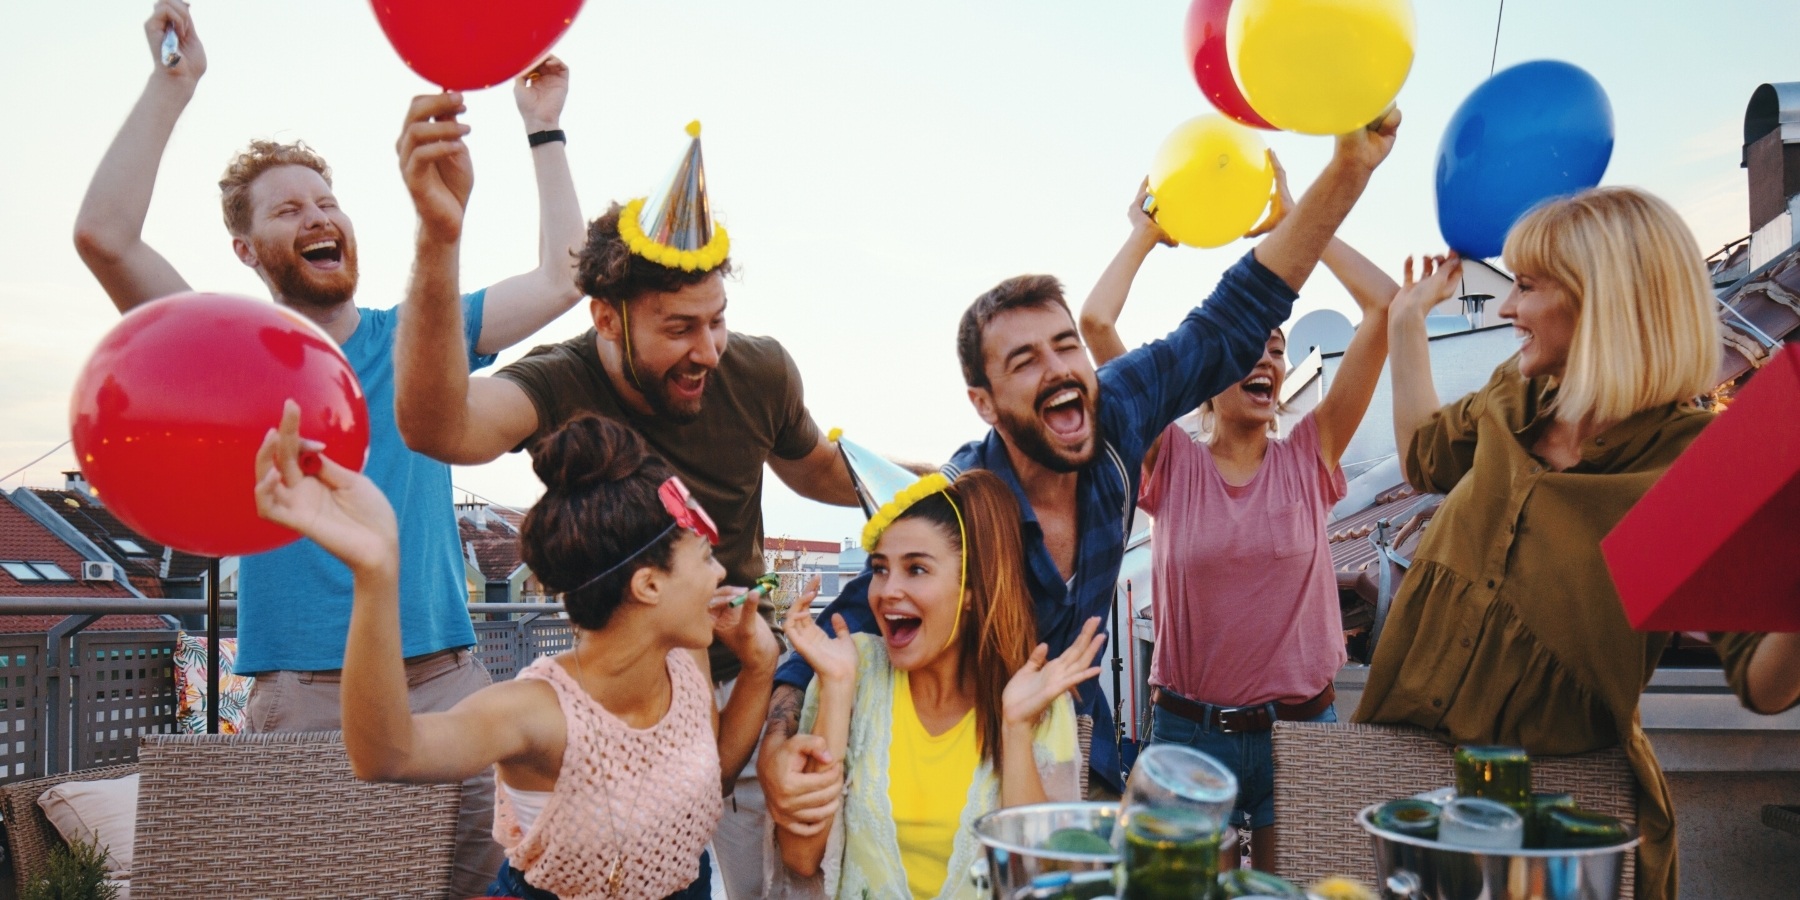 How To Plan A Surprise Birthday Party The Mixers Guide